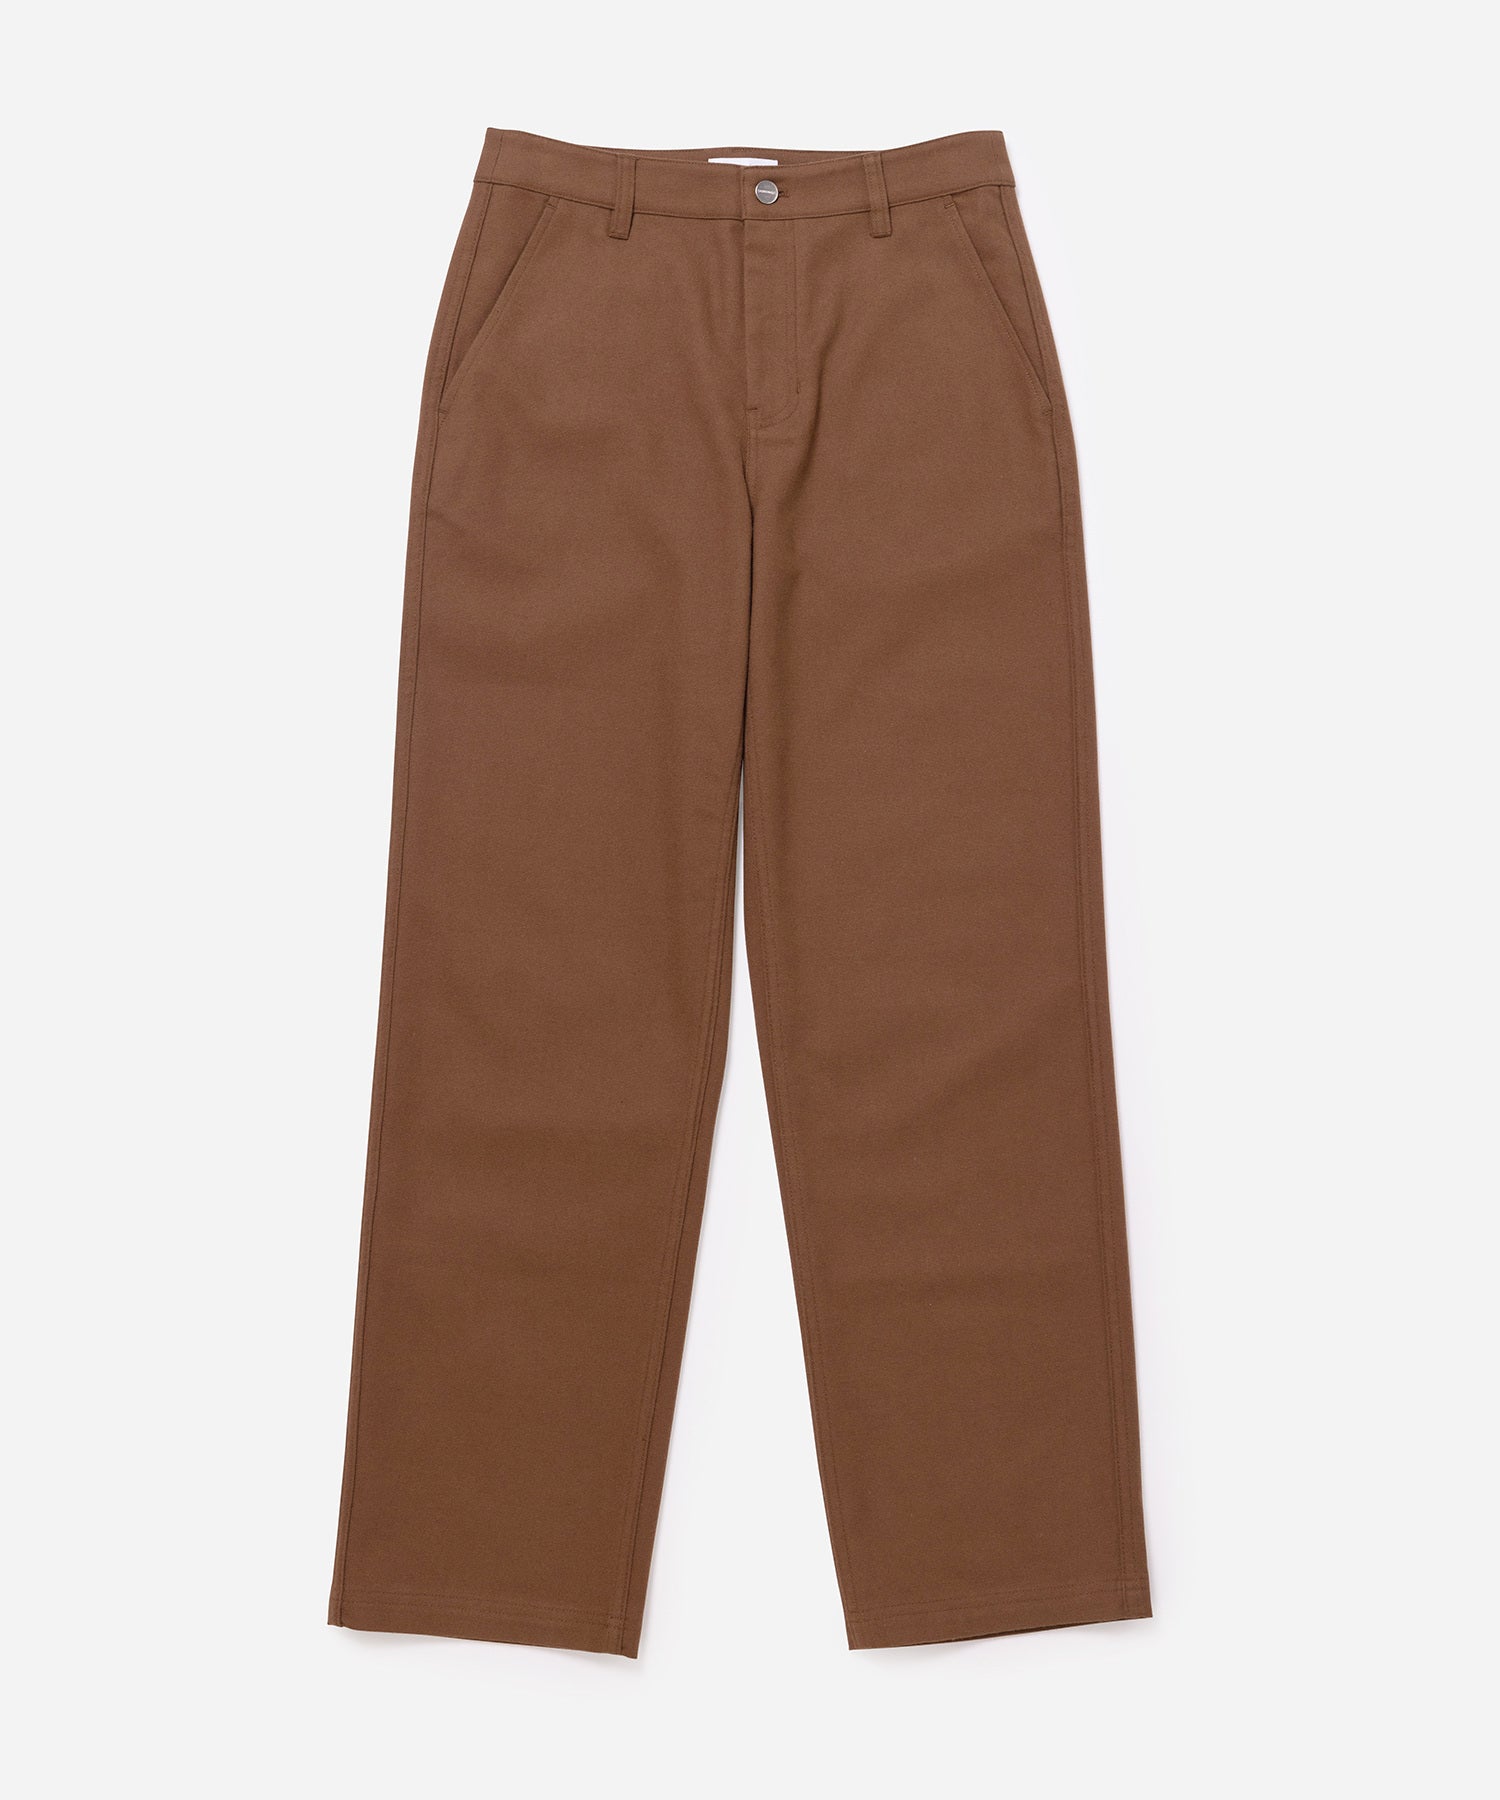 Mulberry Brushed Cotton Workwear Pant-